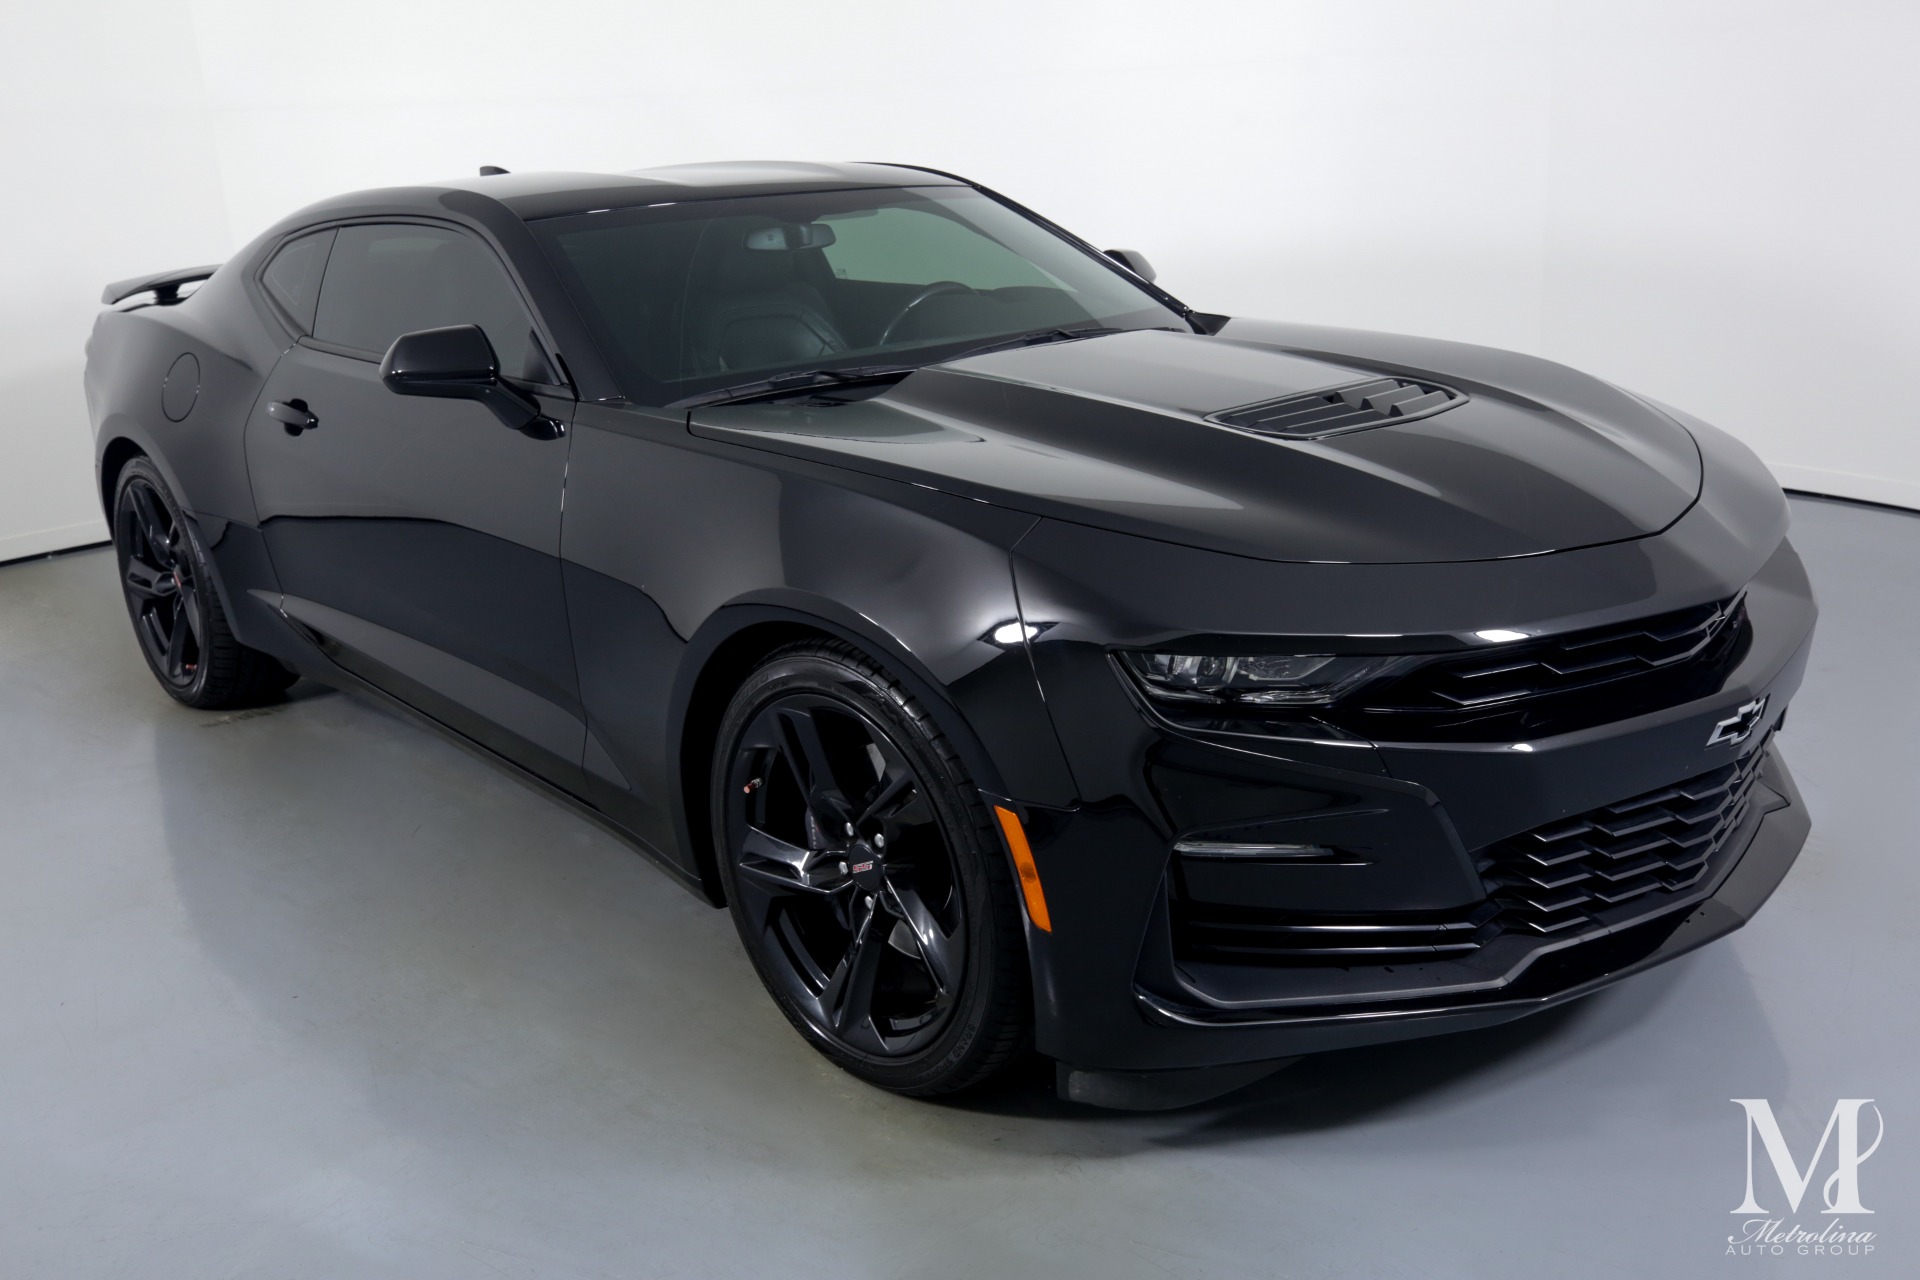 Used 2019 Chevrolet Camaro SS for sale $48,996 at Metrolina Auto Group in Charlotte NC 28217 - 2